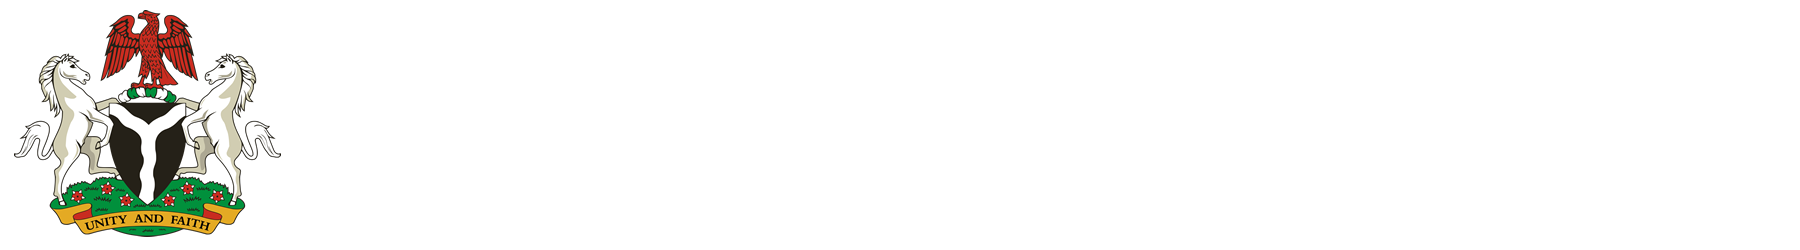 EMBASSY OF NIGERIA TO ETHIOPIA, DJIBOUTI, AND PERMANENT MISSION OF THE FEDERAL REPUBLIC OF NIGERIA TO THE AFRICAN UNION AND UNECA